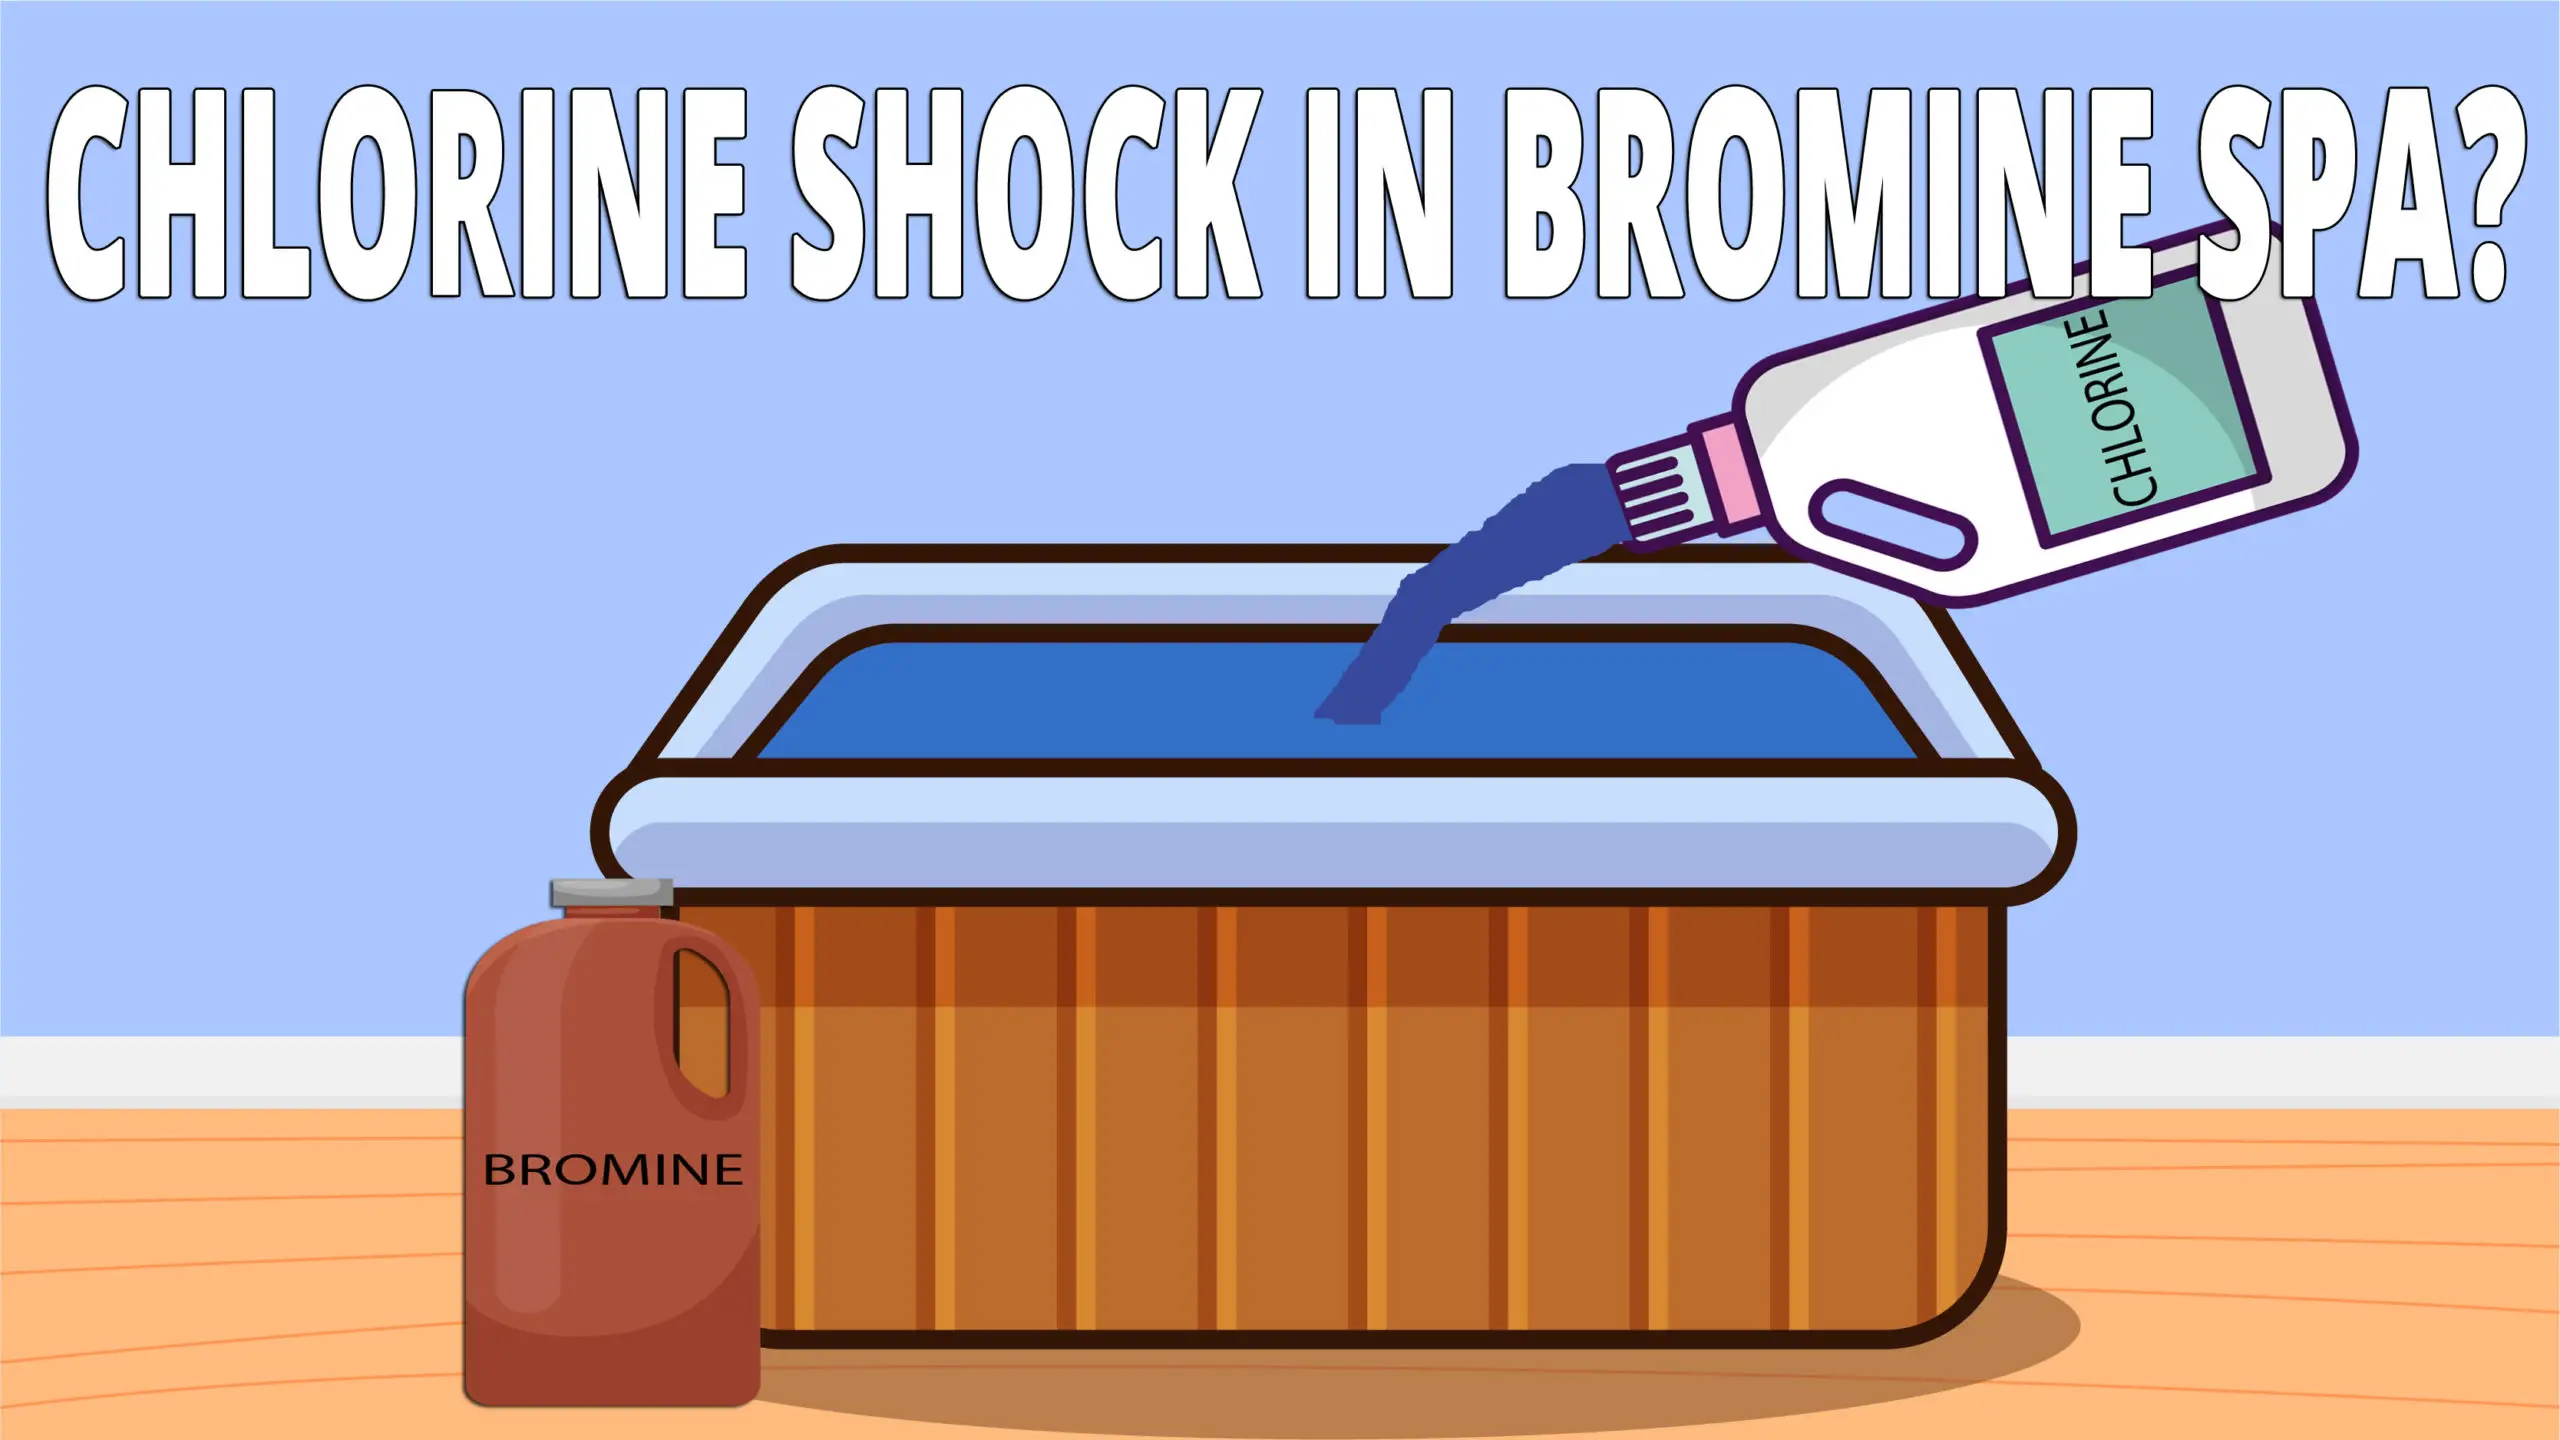 Can You Use Chlorine Shock in a Bromine Spa? (Explained!)